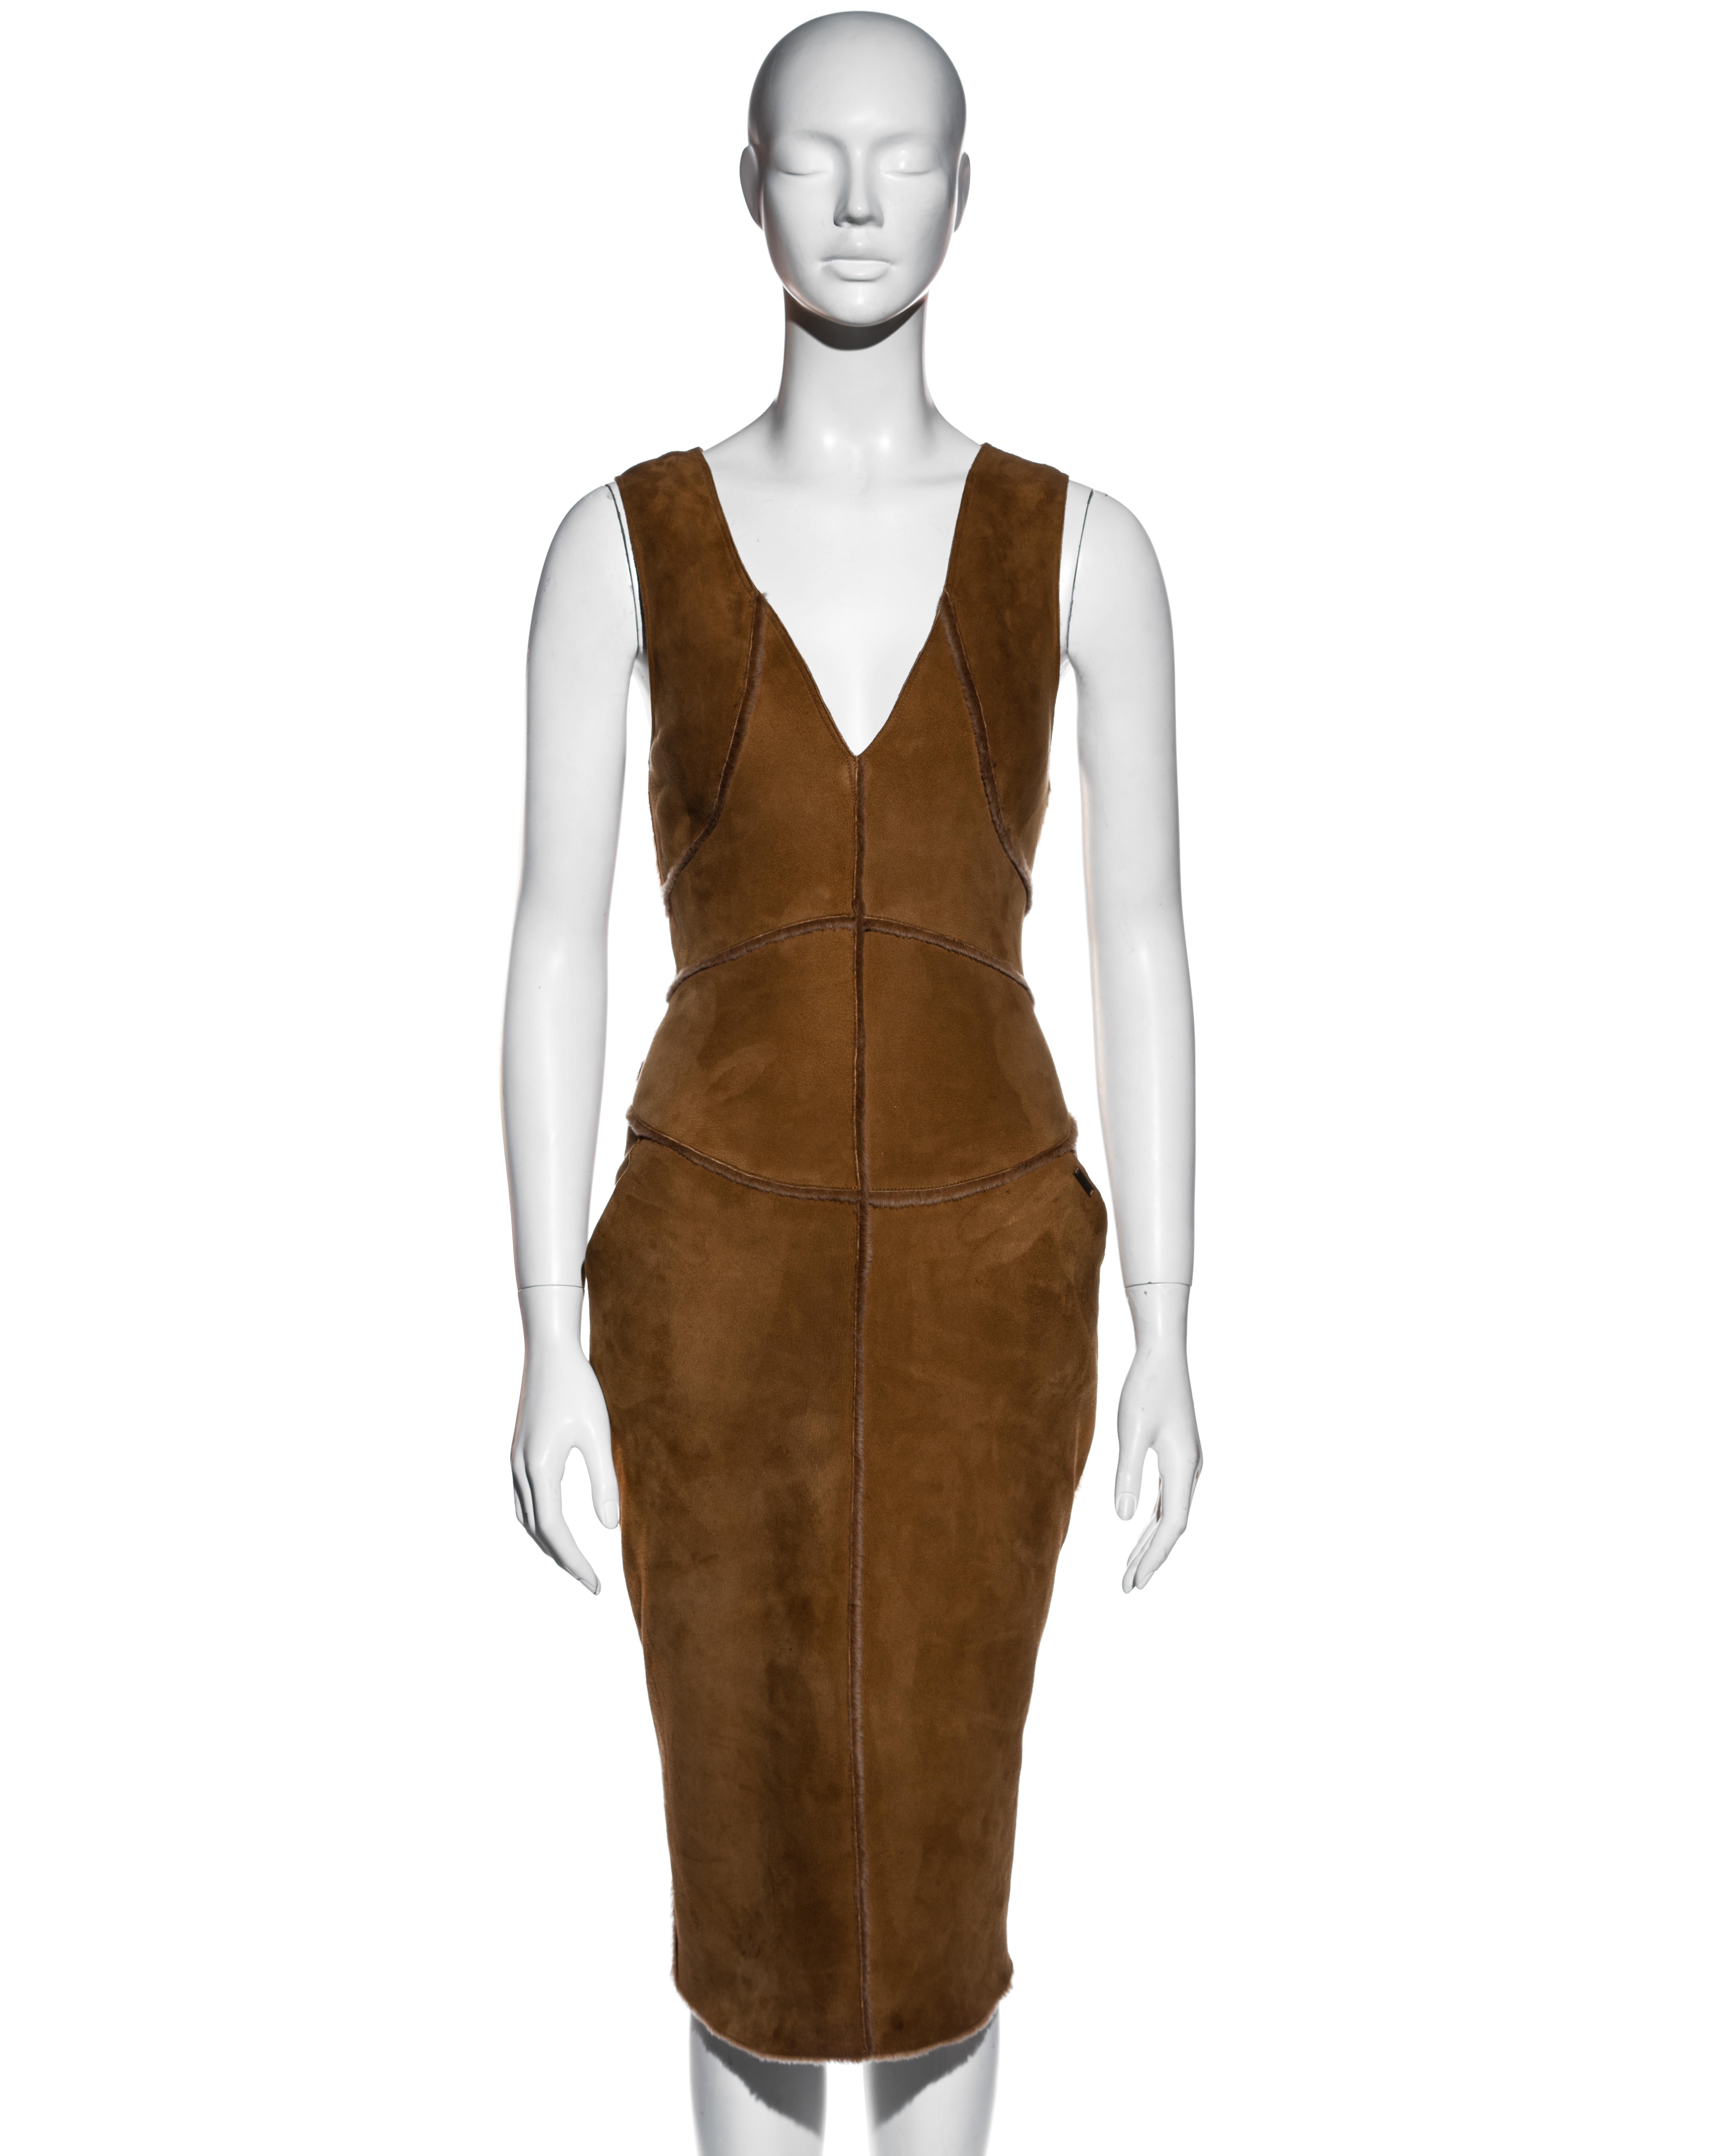 ▪ Chanel metallic brown sheepskin sheath dress 
▪ Designed by Karl Lagerfeld  
▪ V-neck 
▪ 2 front pockets 
▪ Top stitch seams with raw edge  
▪ Curved seaming accentuates the waist 
▪ Zipper down centre back  
▪ IT 42 - FR 38 - UK 10 - US 6
▪